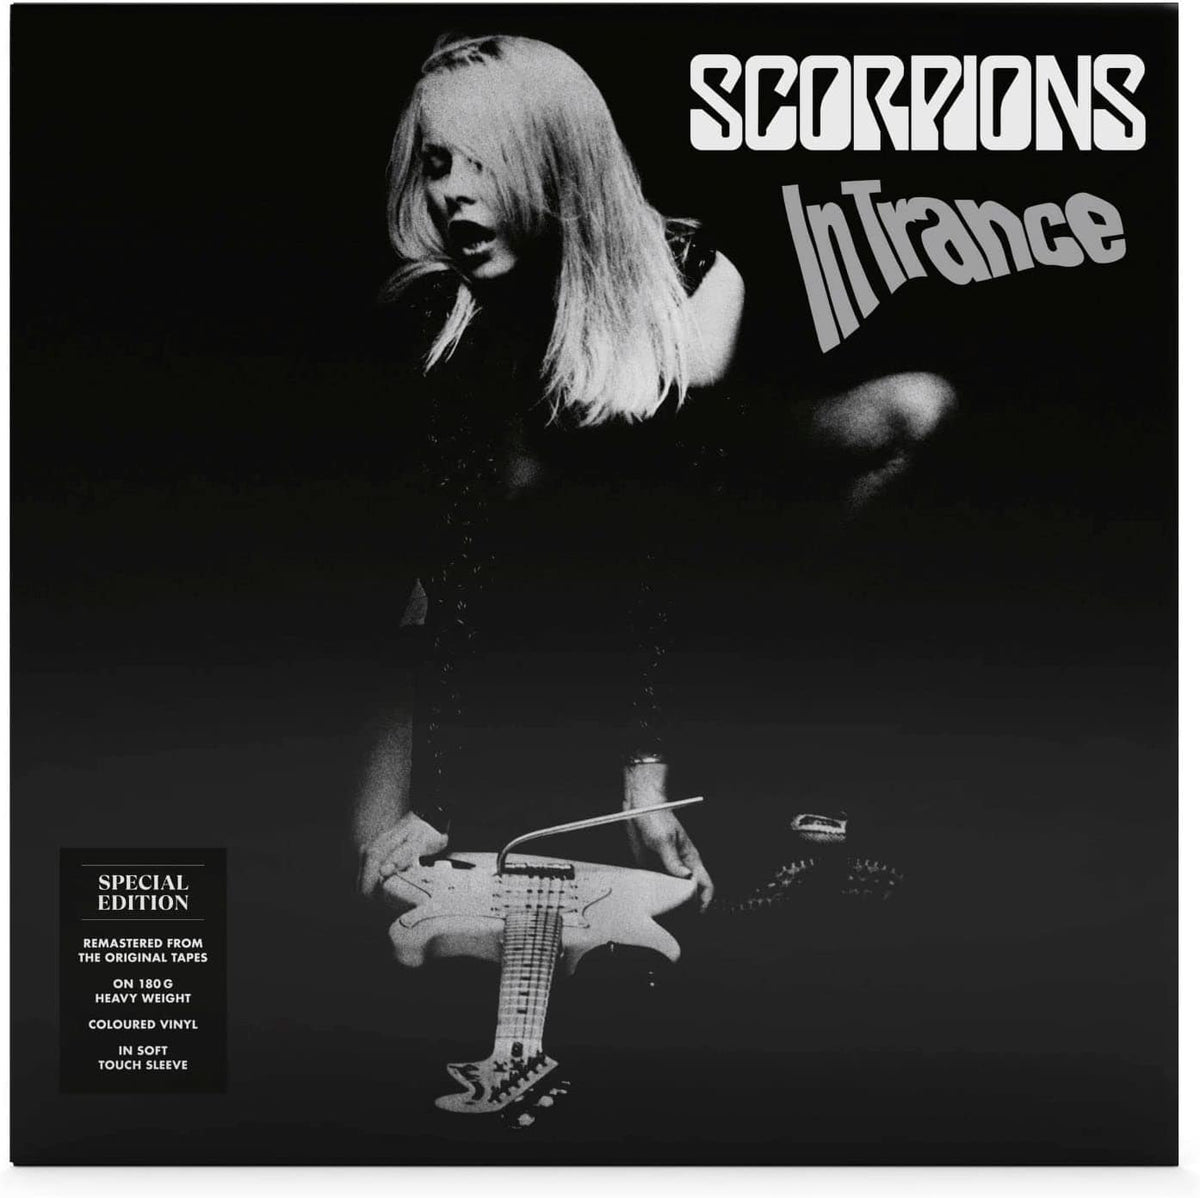 In Trance - Scorpions [Crystal Clear Vinyl]